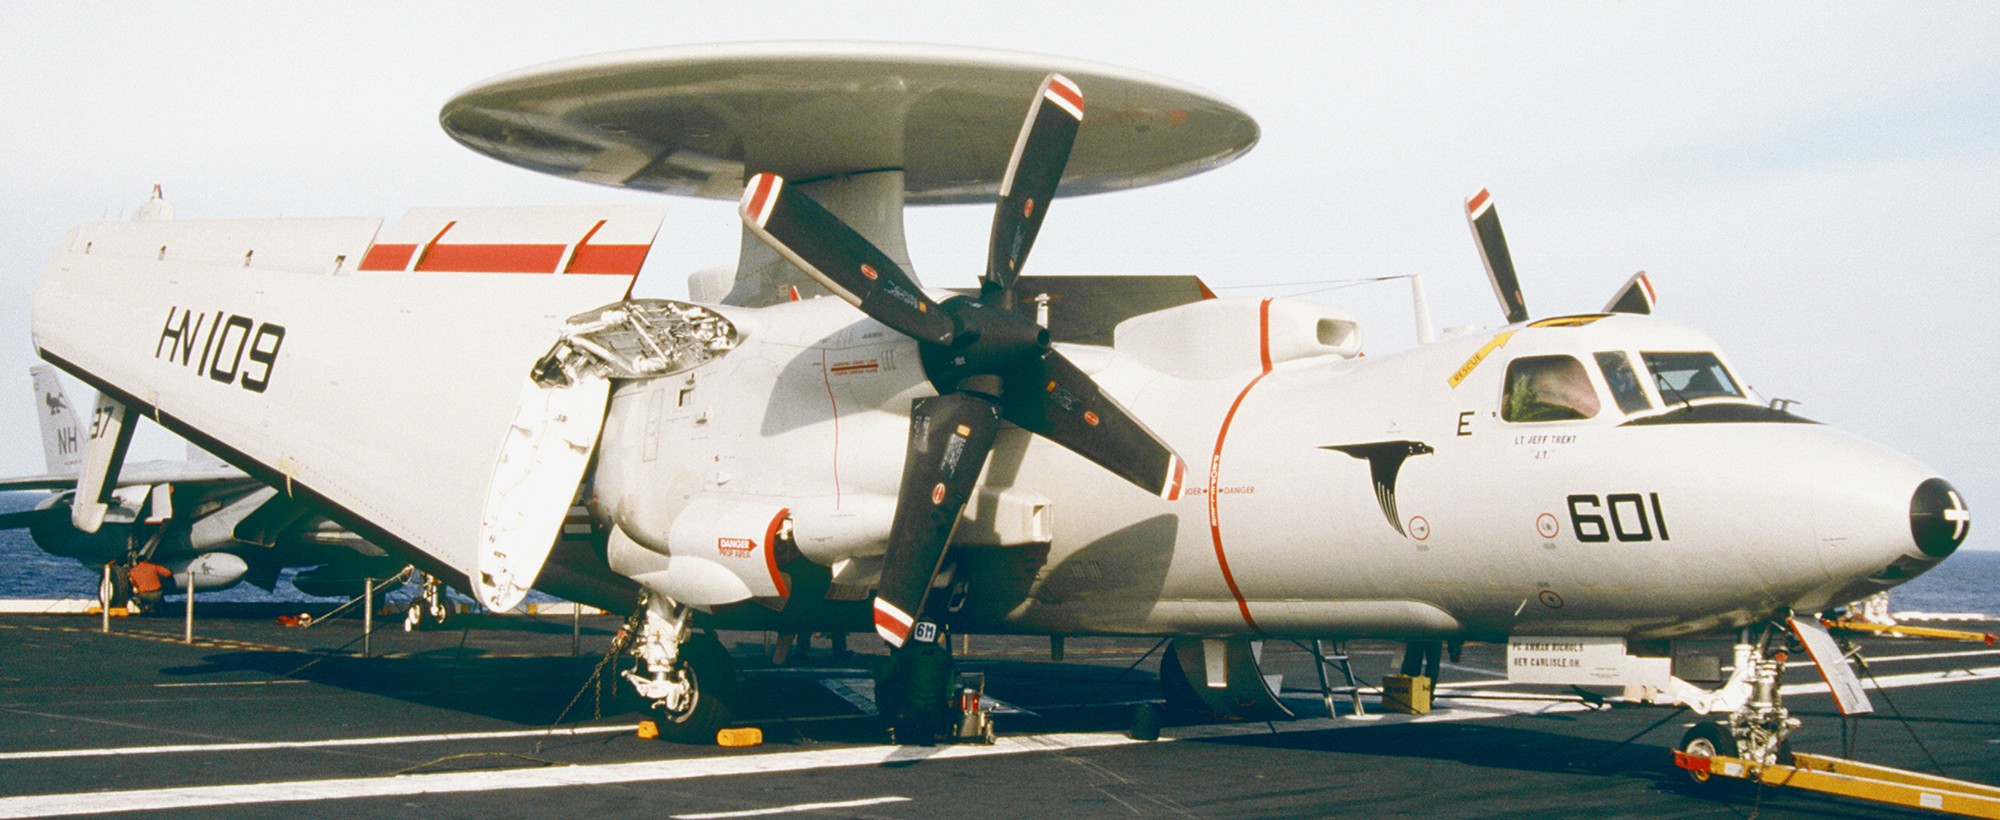 vaw-117 wallbangers carrier airborne early warning squadron navy e-2c hawkeye cvw-11 uss abraham lincoln cvn-72 84